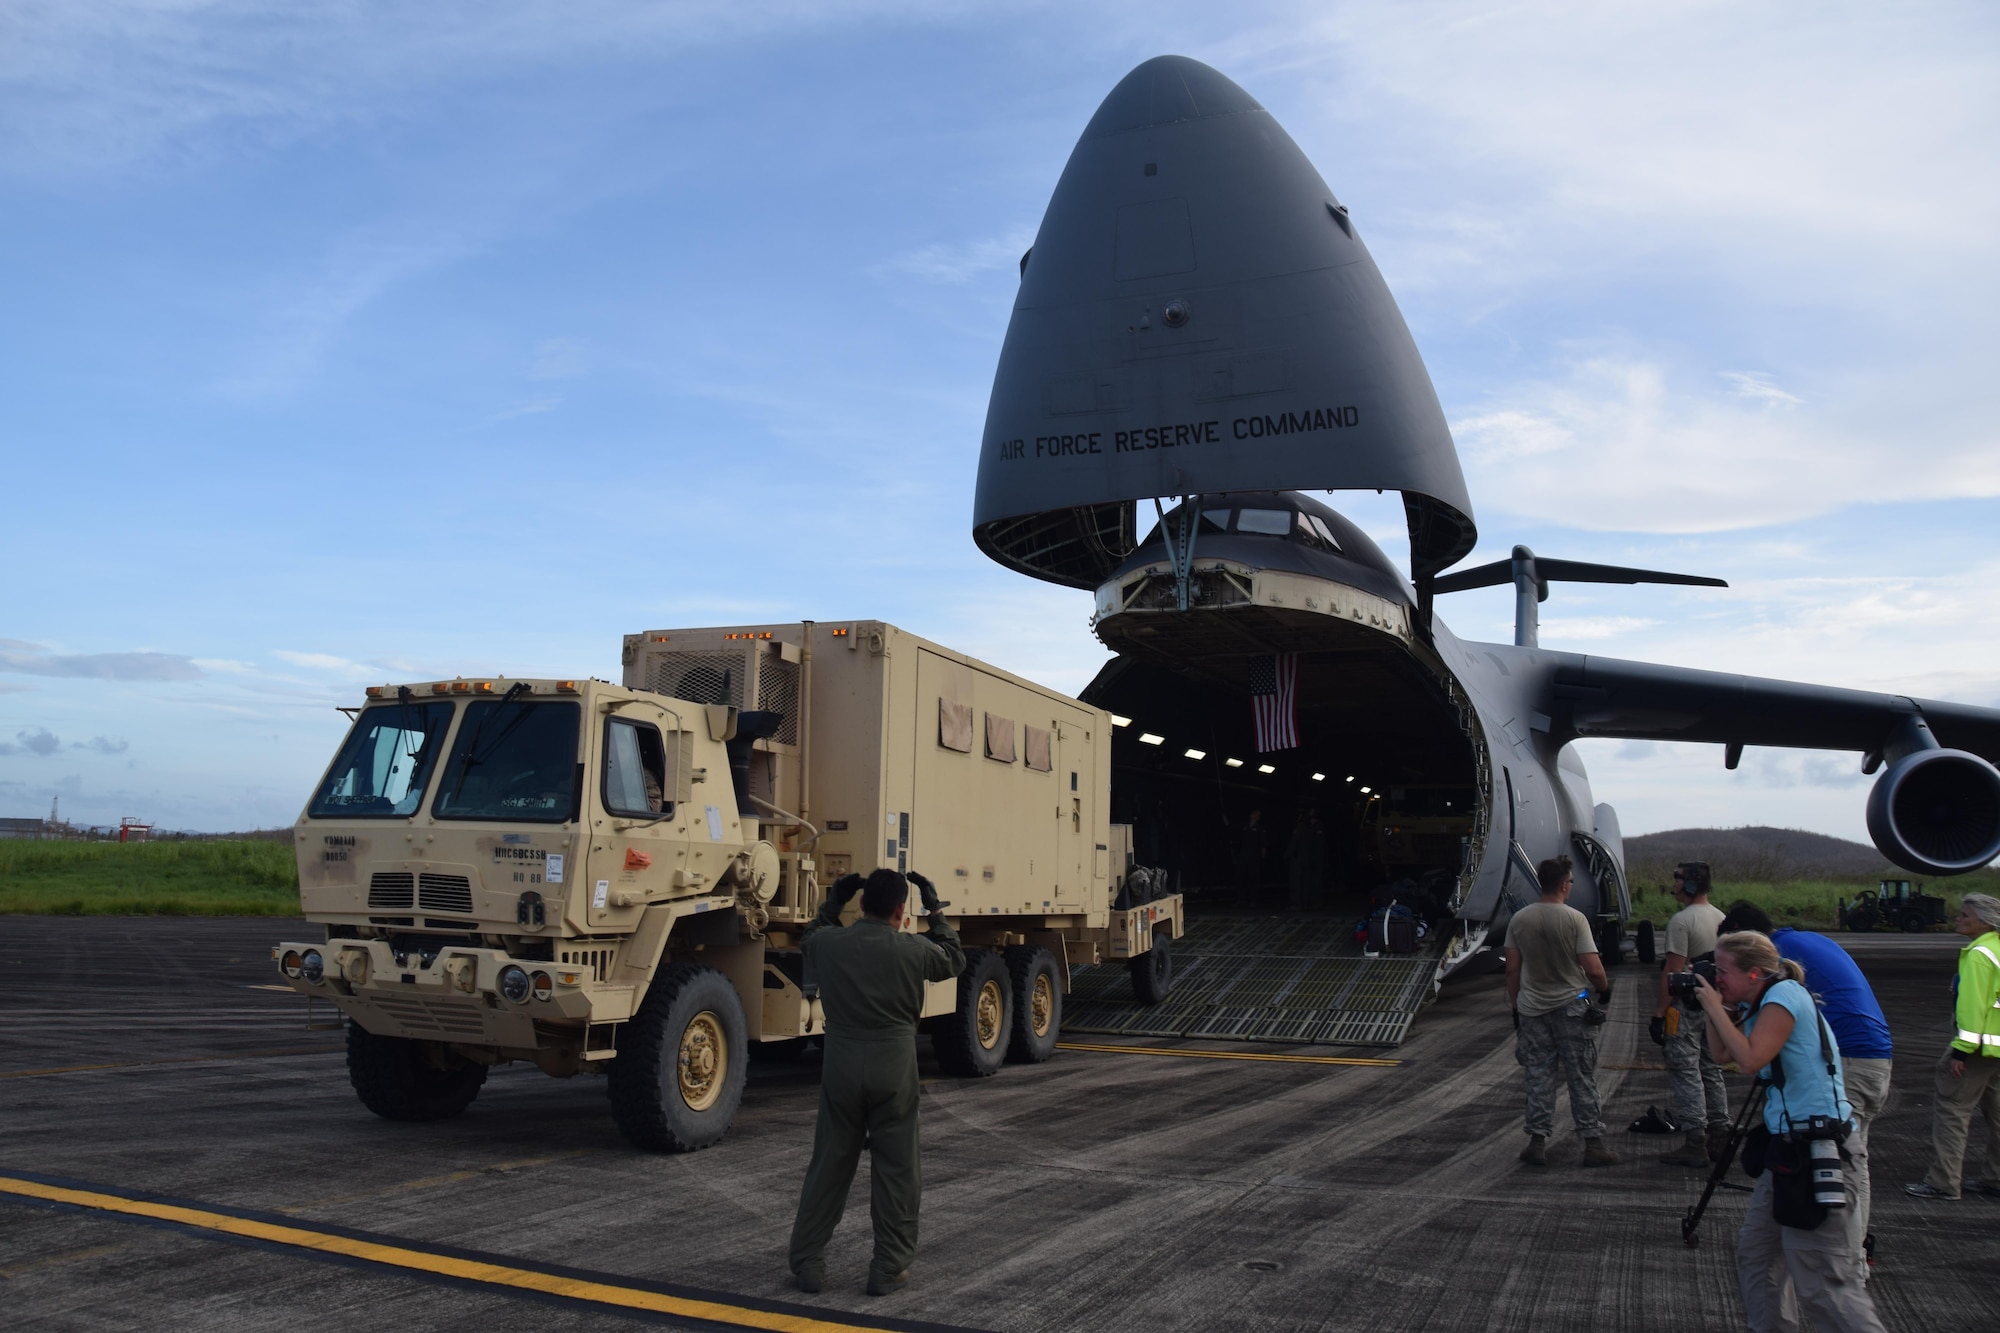 A Joint Incident Site Communications Capability (JISCC) vehicle is unloaded from an Air Force Reserve Command’s 433rd Airlift Wing C-5M Super Galaxy at Ceiba, Puerto Rico Oct. 1, 2017. The C-5M, flown by Reserve Citizen Airmen from Joint Base San Antonio-Lackland, Texas, took the JISCC, 11 Soldiers,  supplies and two fuel trucks to Puerto Rico to aid hurricane recovery efforts that have affected the United States and its territories  in the Caribbean. (U.S.  Air Force photo by Tech. Sgt. Carlos J. Treviño)